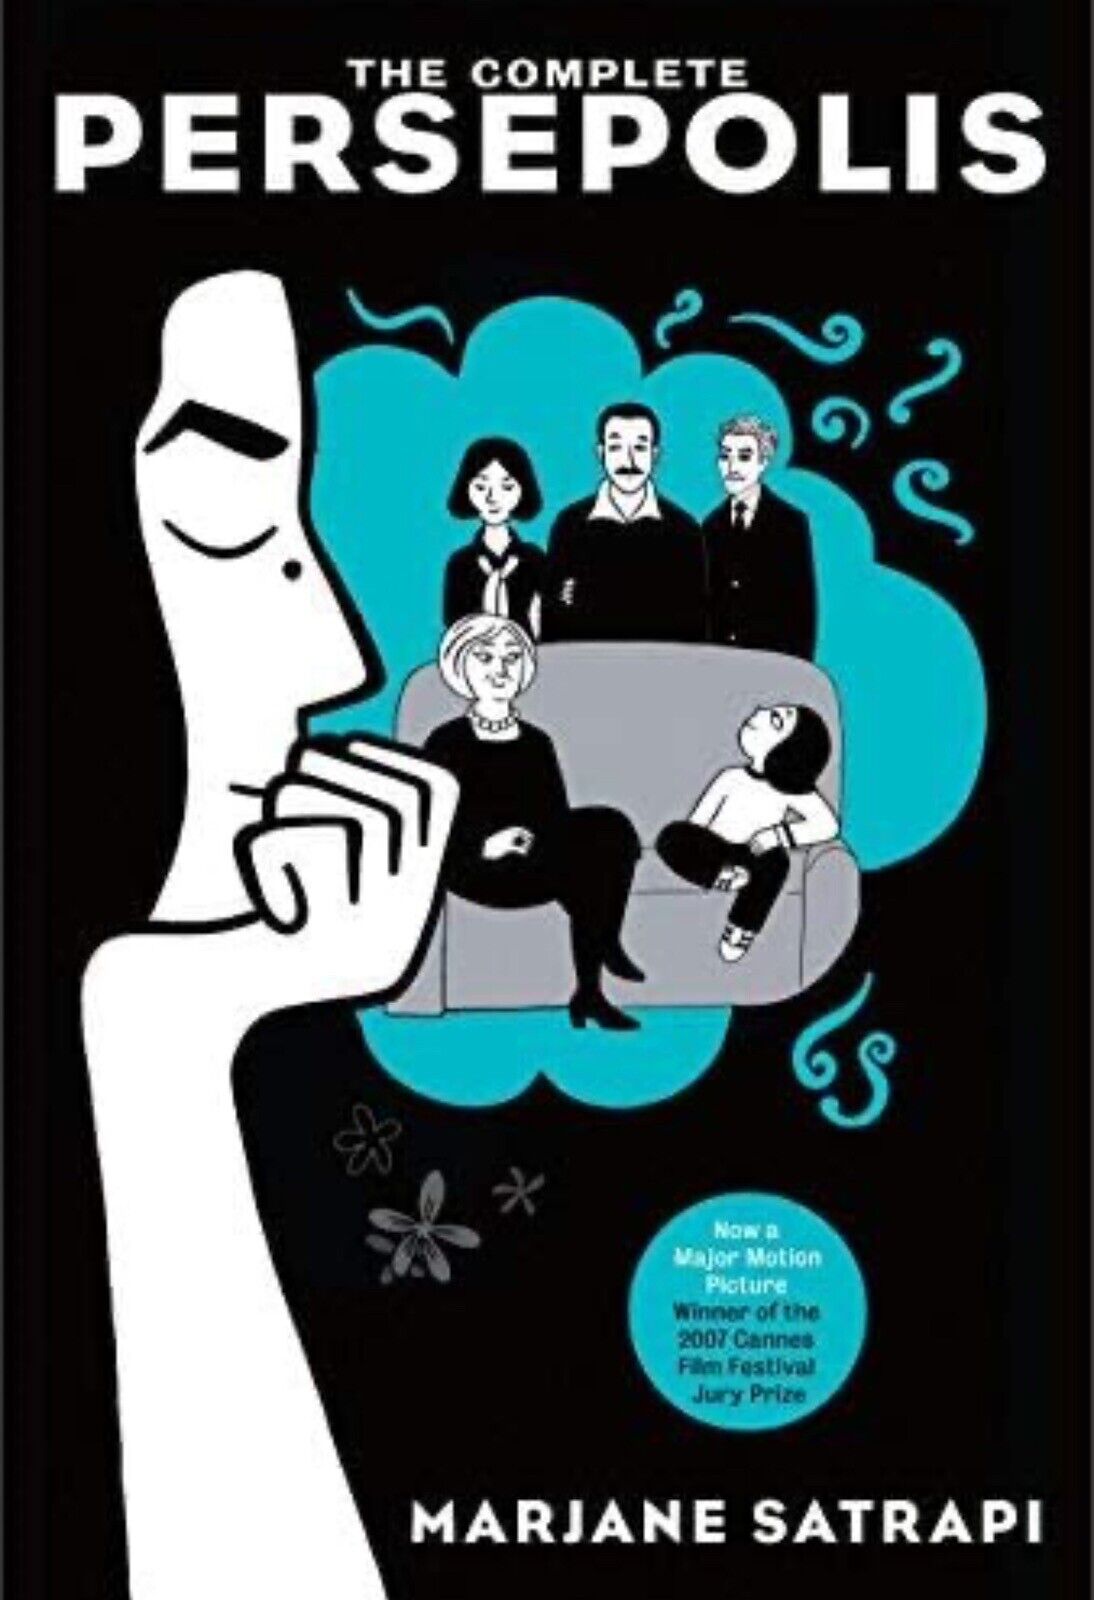 The Complete Persepolis (Pantheon, October 2007) New